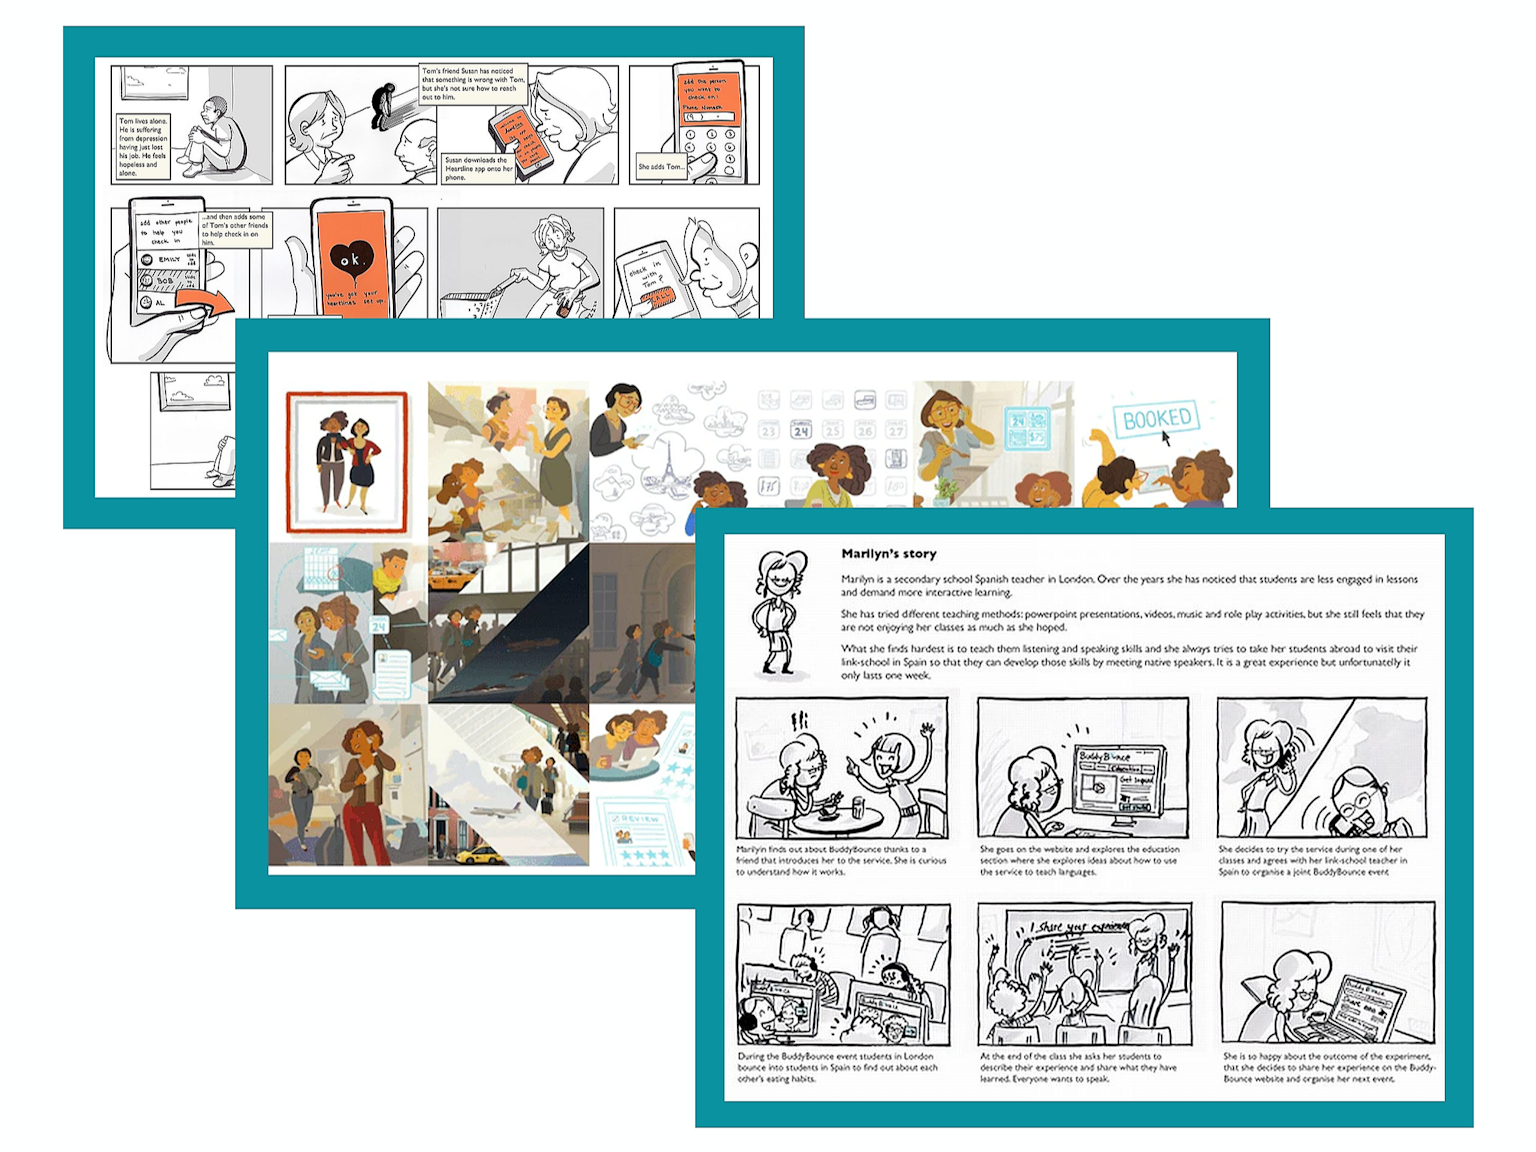 Vision Storyboards are a powerful communication tool
